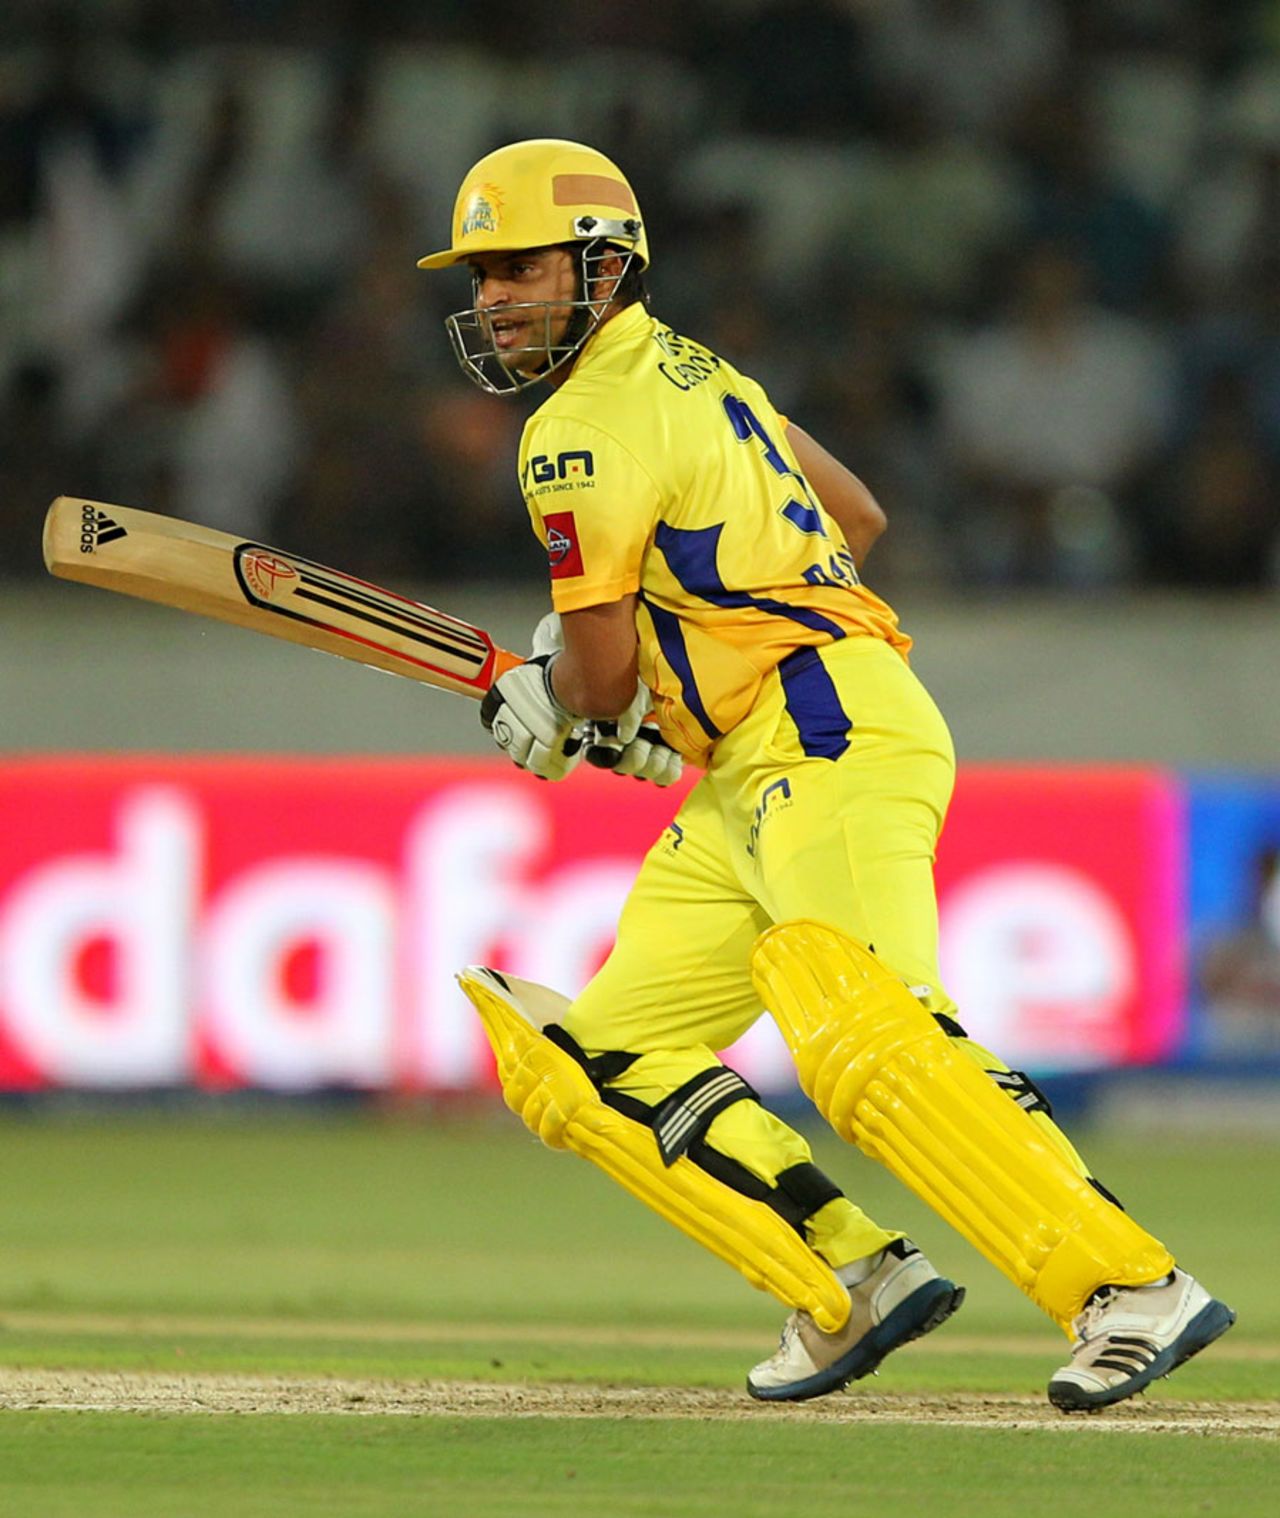 Suresh Raina punches a drive through the offside, Sunrisers Hyderabad v Chennai Super Kings, IPL 2013, Hyderabad, May 8, 2013